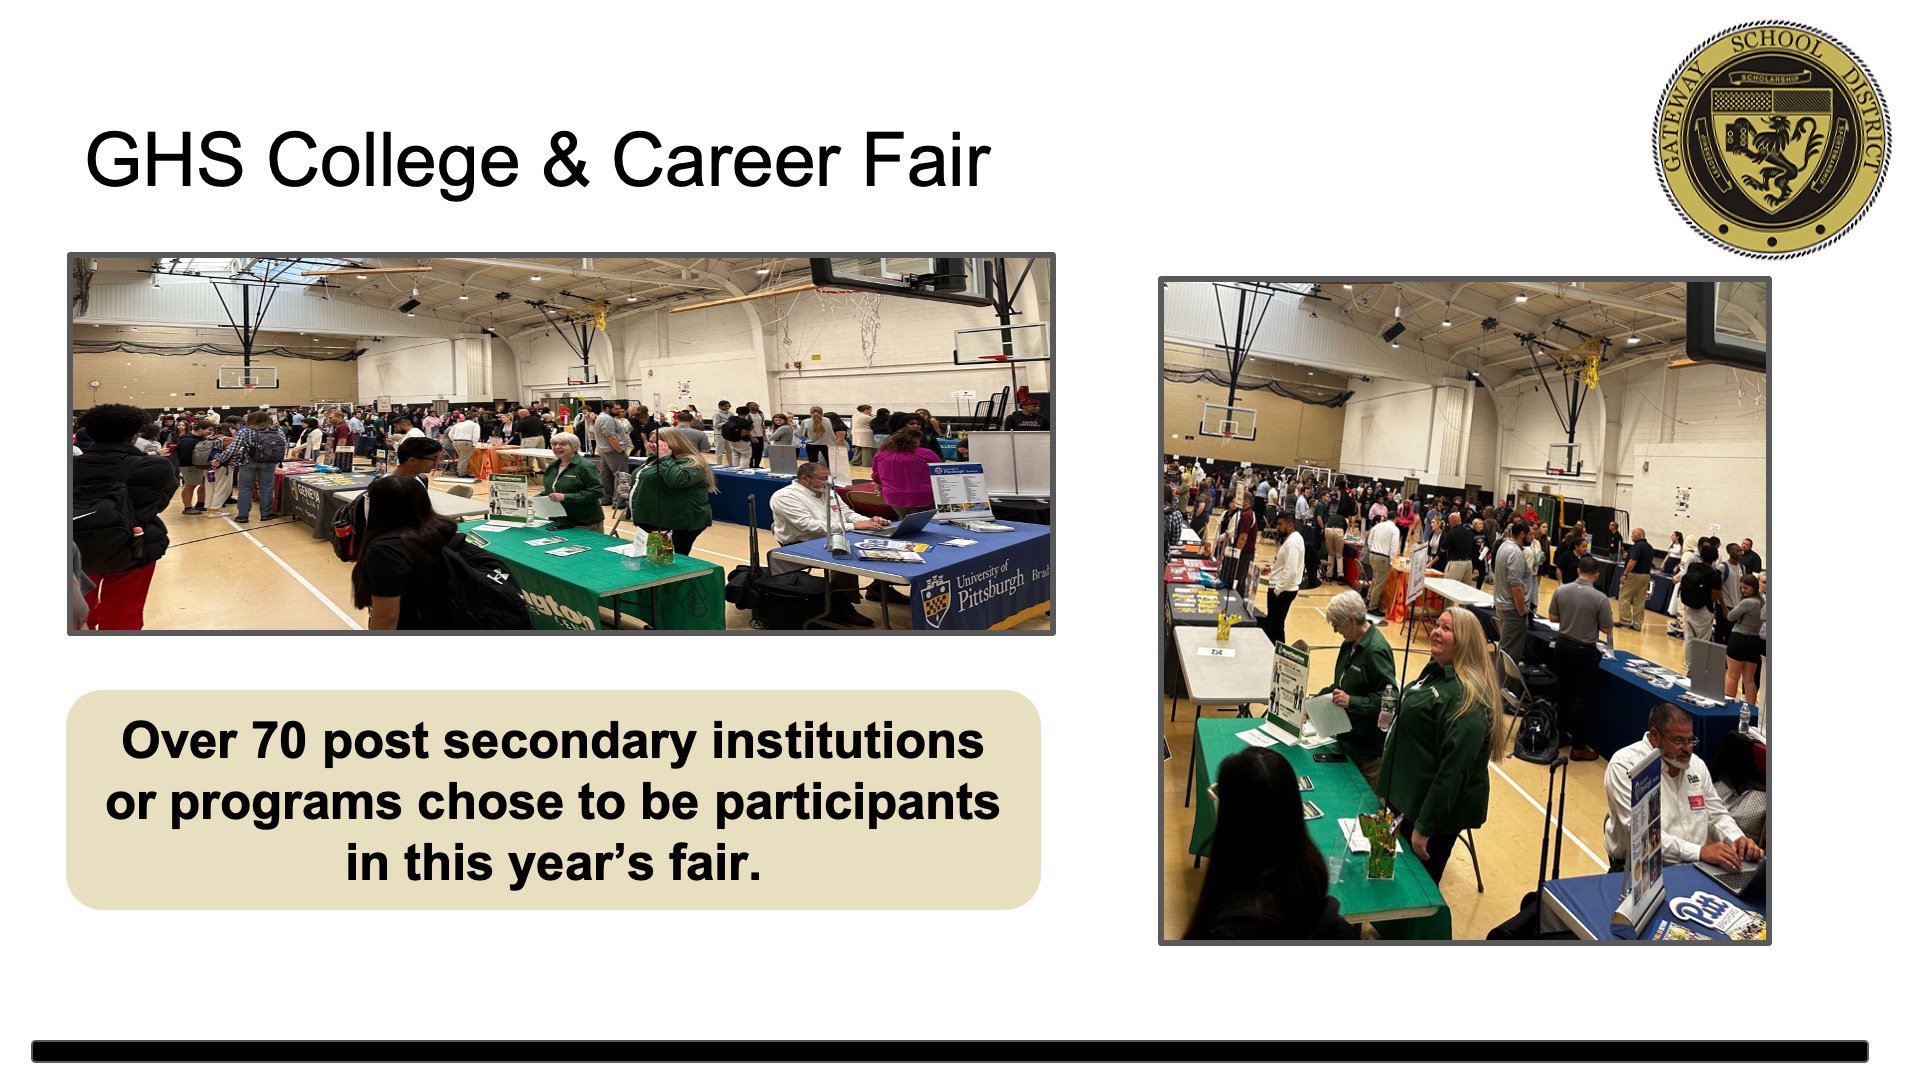 GHS College & Career Fair  Over 70 post secondary institutions or programs chose to be participants in this year’s fair.